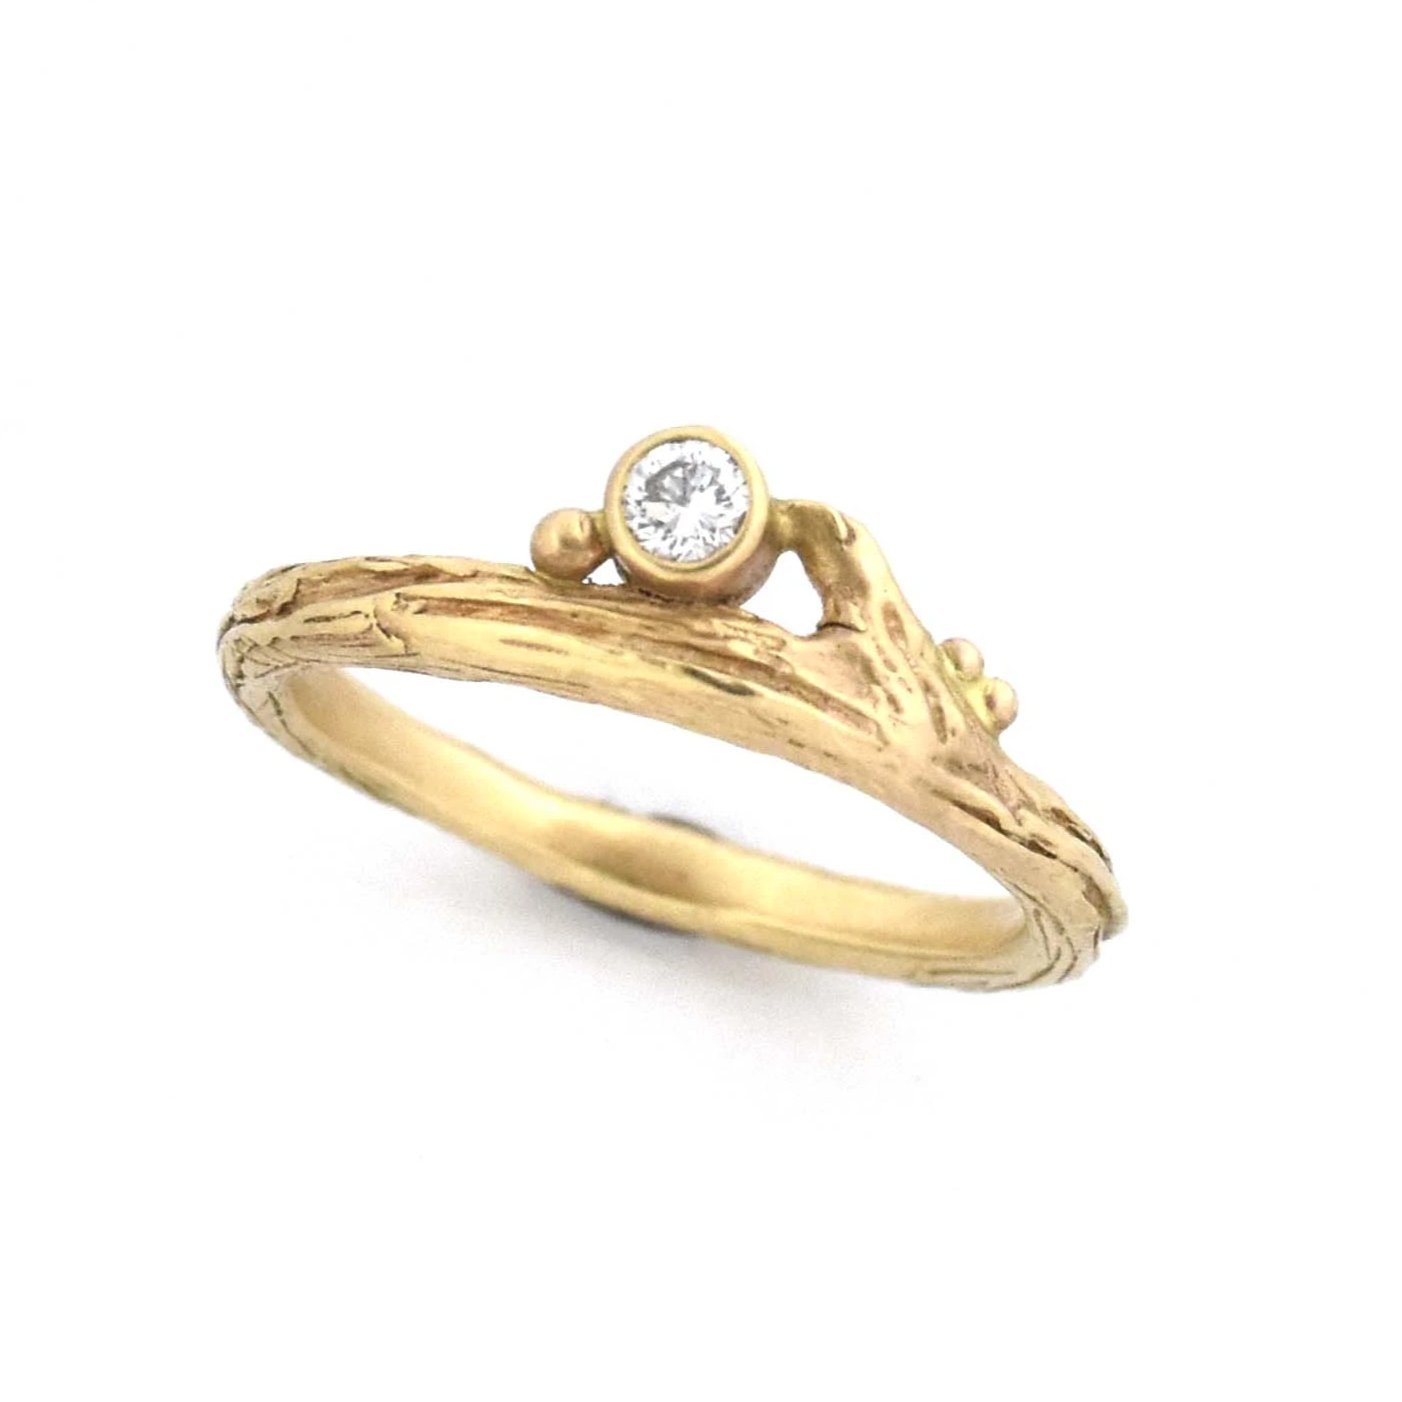 Yellow Gold Diamond & Roses Twig Ring - your choice of stone - Wedding Ring  Recycled Diamond / Select Size  Recycled Diamond / 4 3715 - handmade by Beth Millner Jewelry